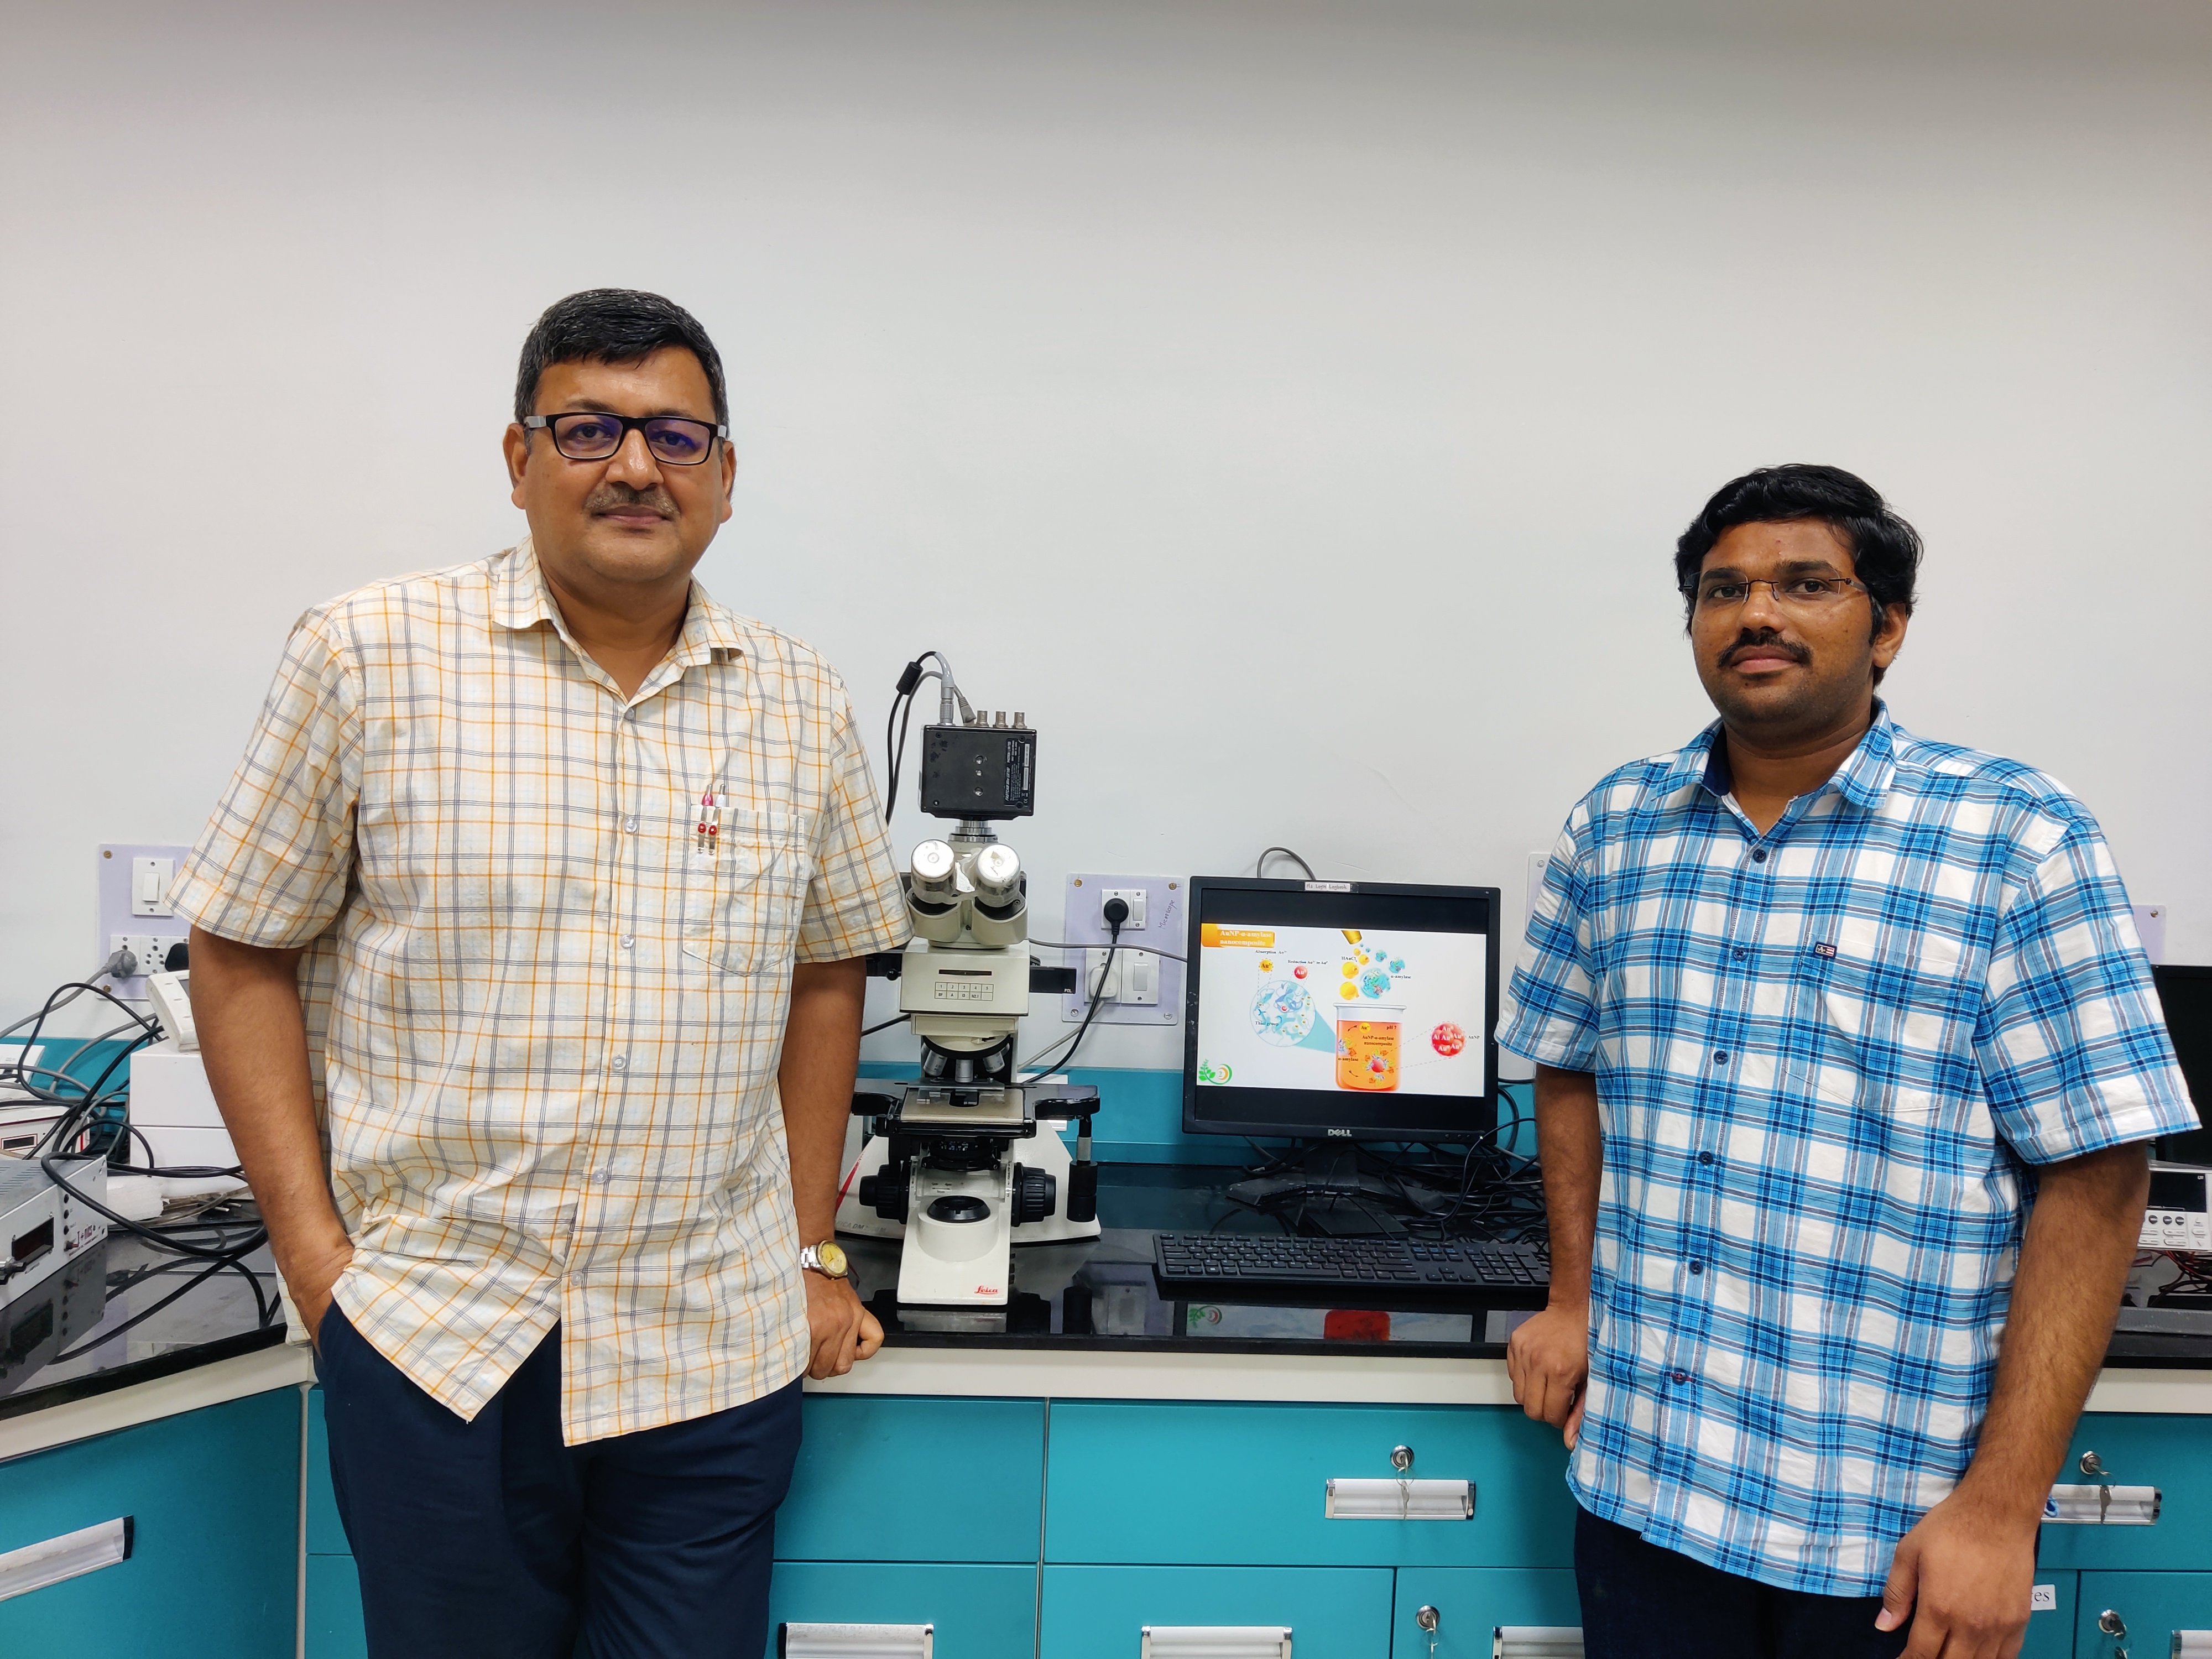 IIT Guwahati researchers develop a Point-of-Care device for Instant Glycemic Index detection of Fast Food